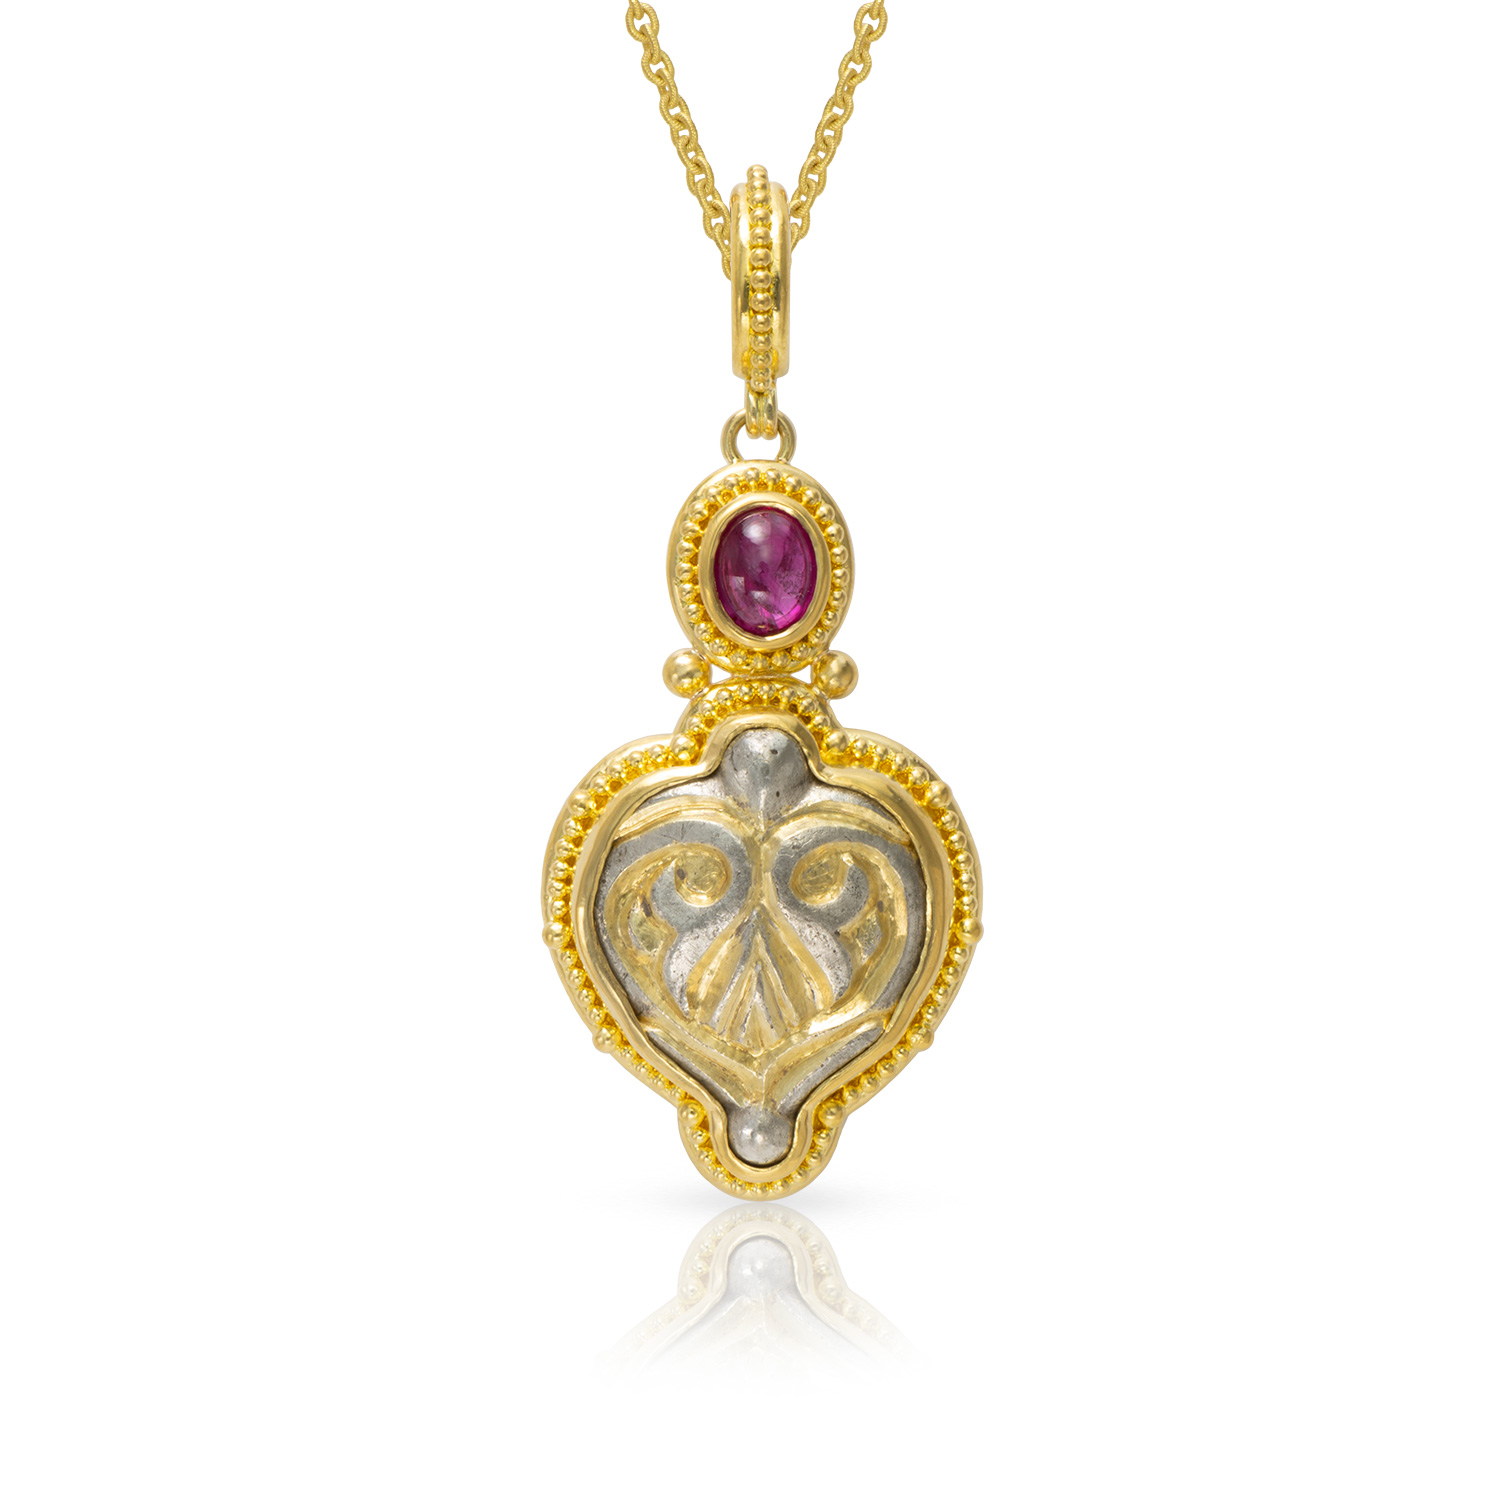 granulation 22kt gold pendant with Medieval artifact and ruby